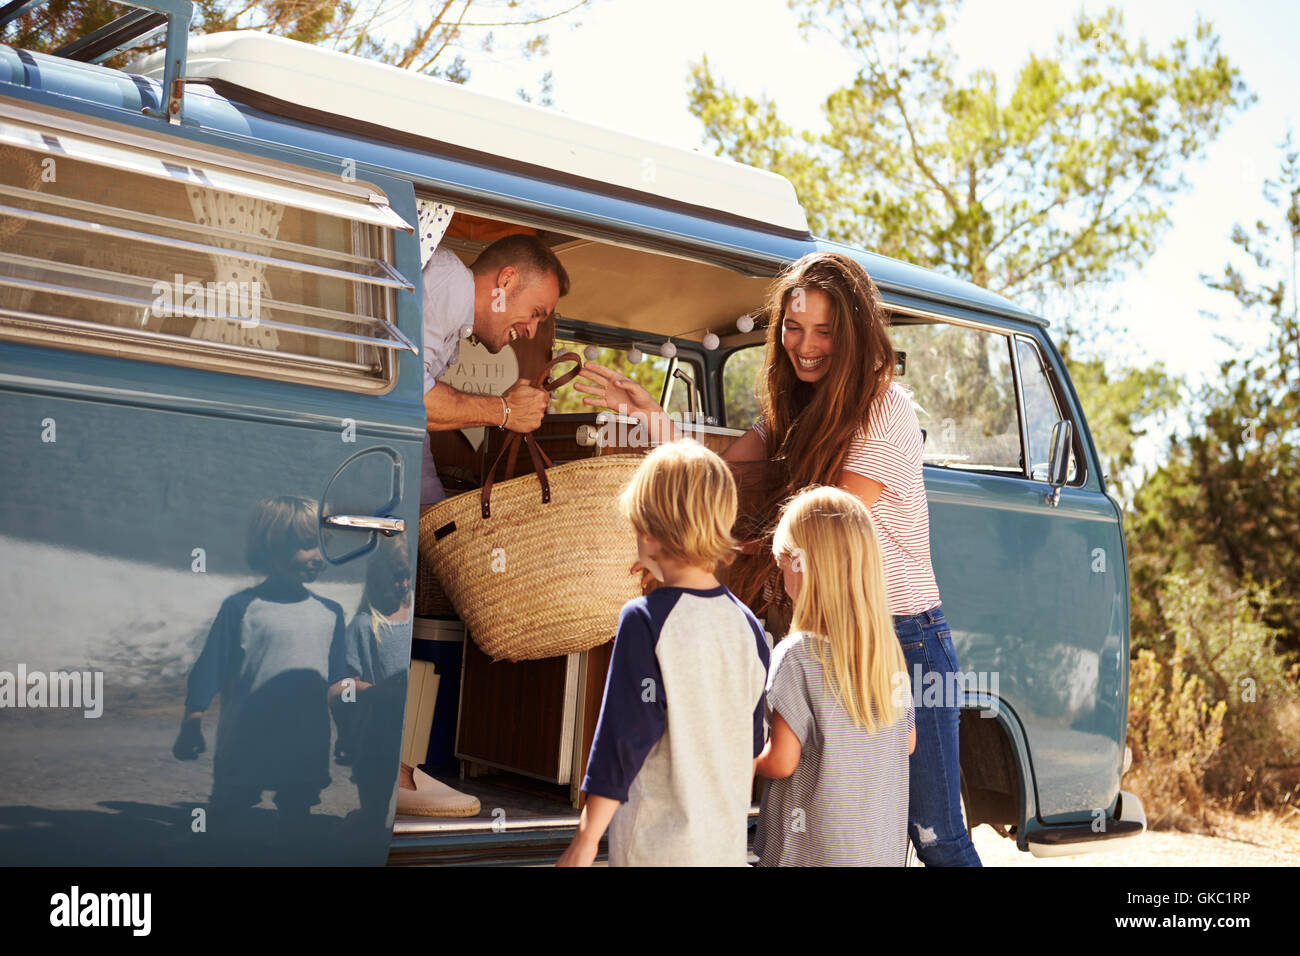 Family packing up their camper van for a road trip vacation Stock Photo